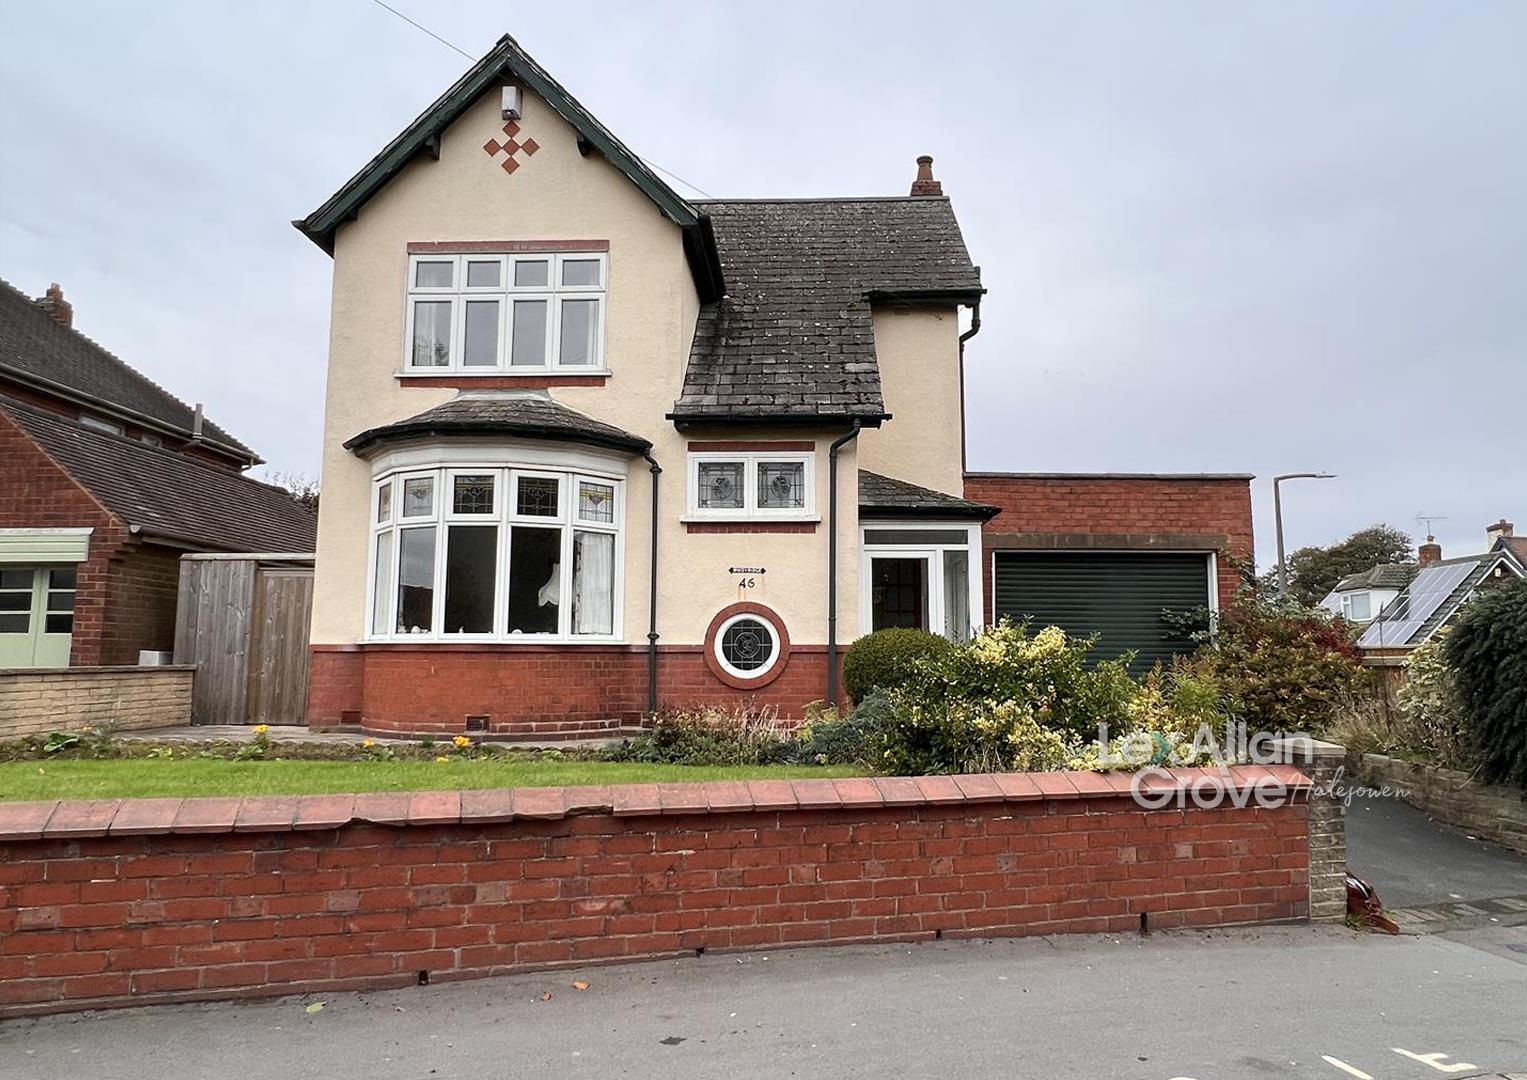 3 bed detached house for sale in Siviters Lane, Rowley Regis - Property Image 1